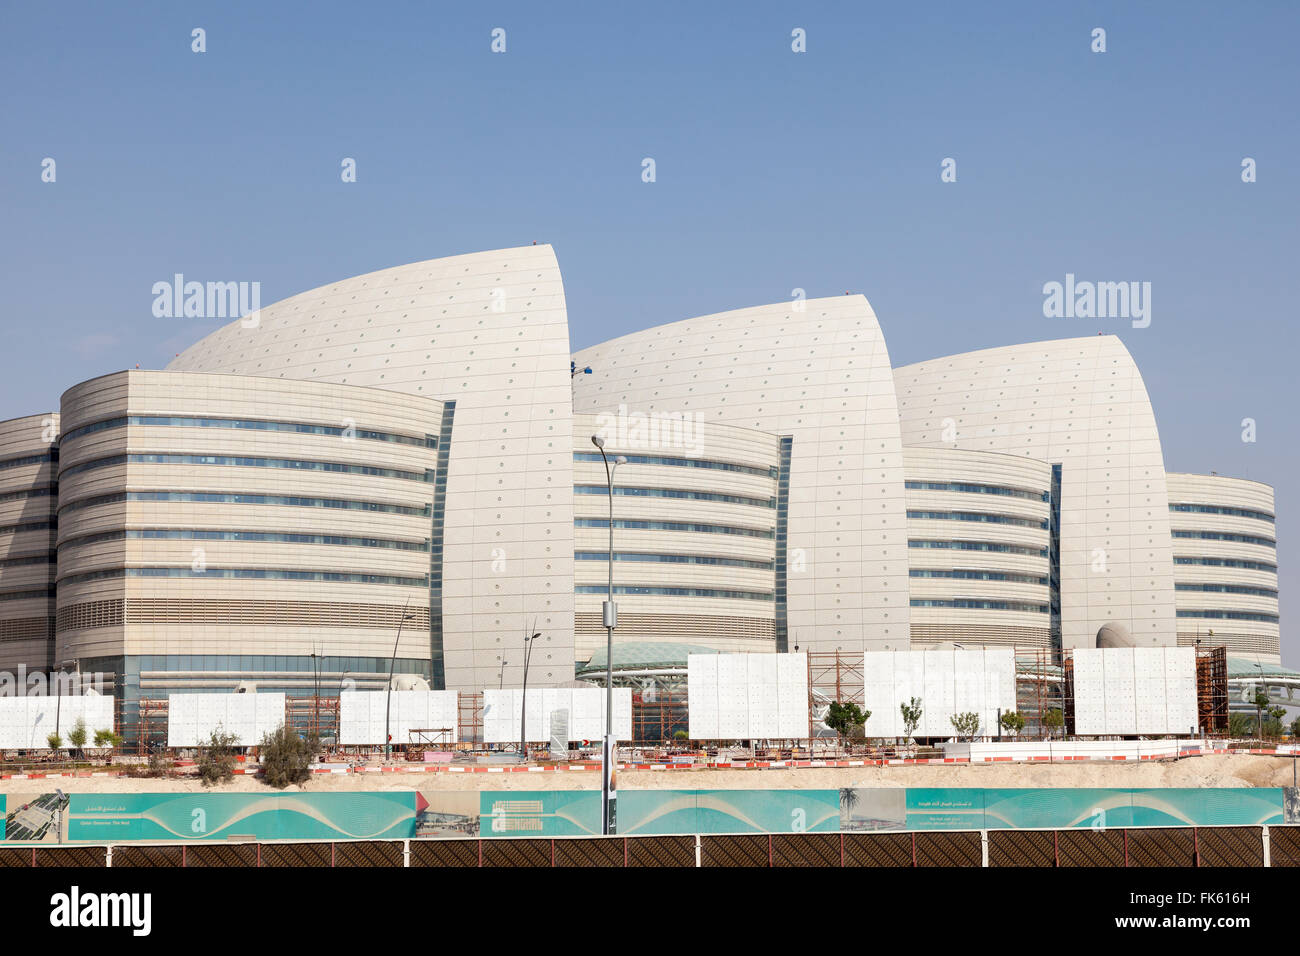 Sidra Medical Research Centre in Doha, Qatar Stock Photo